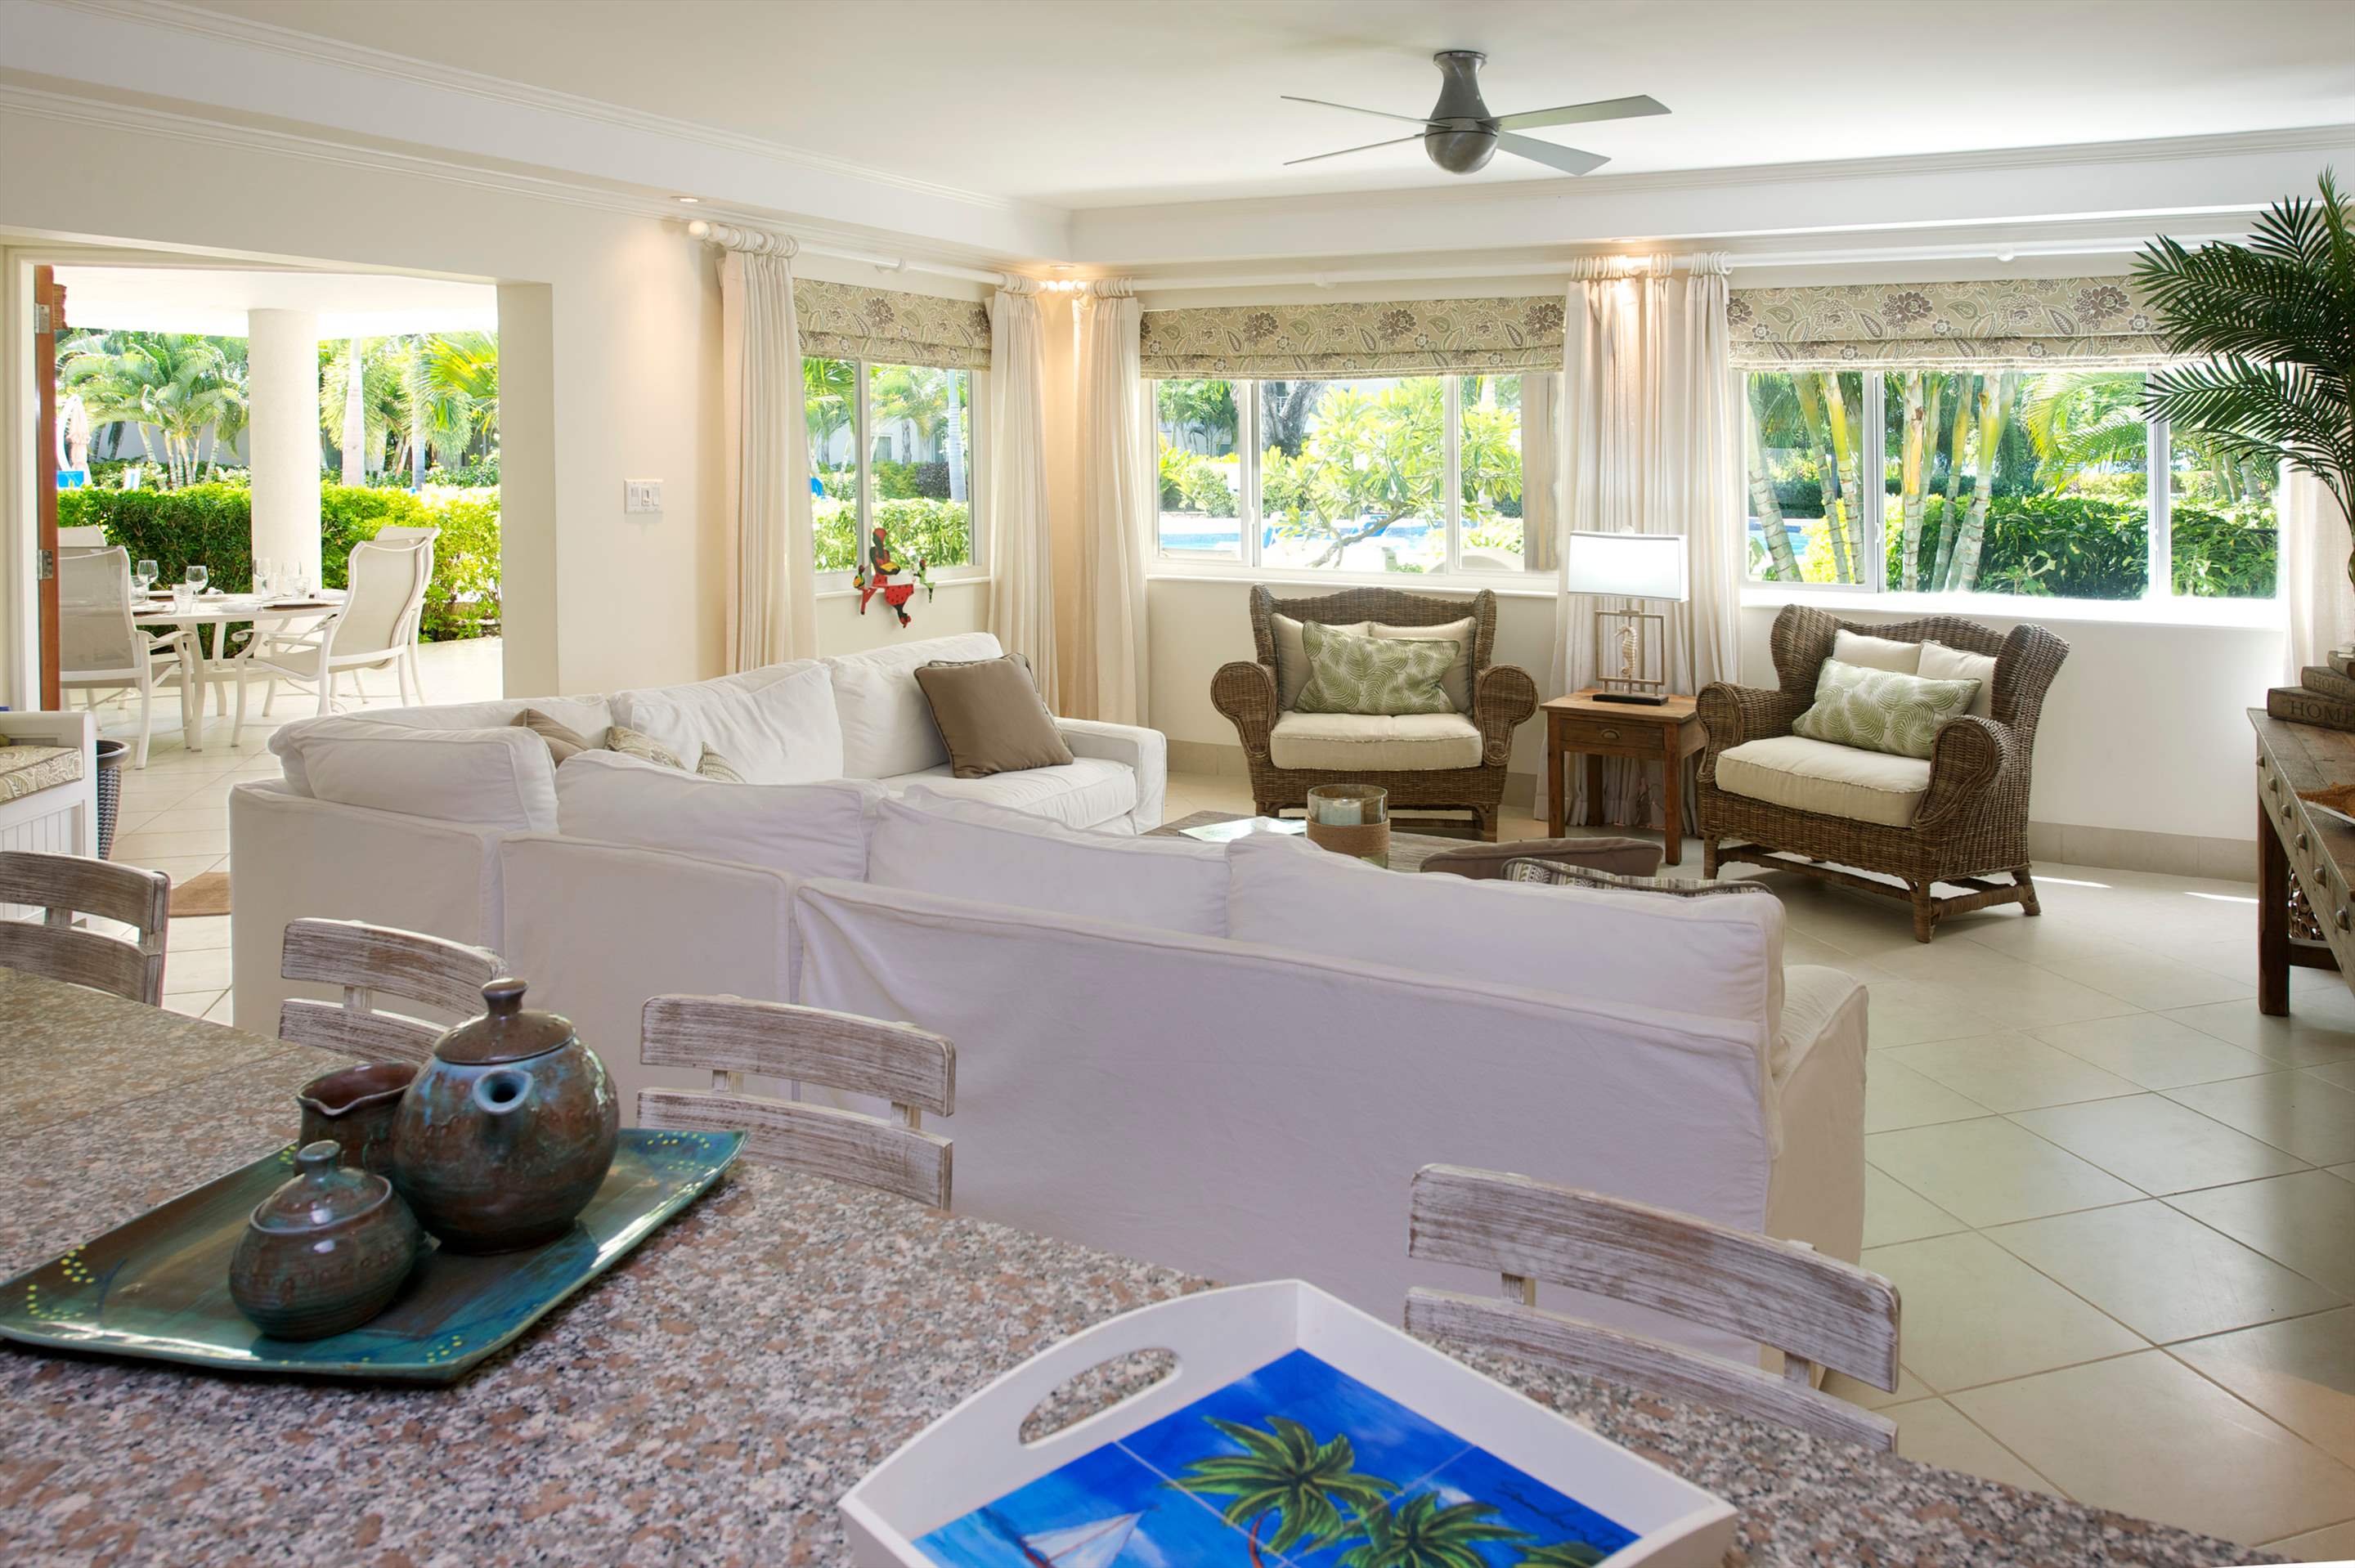 Palm Beach 110, 3 bedroom apartment in St. Lawrence Gap & South Coast, Barbados Photo #5